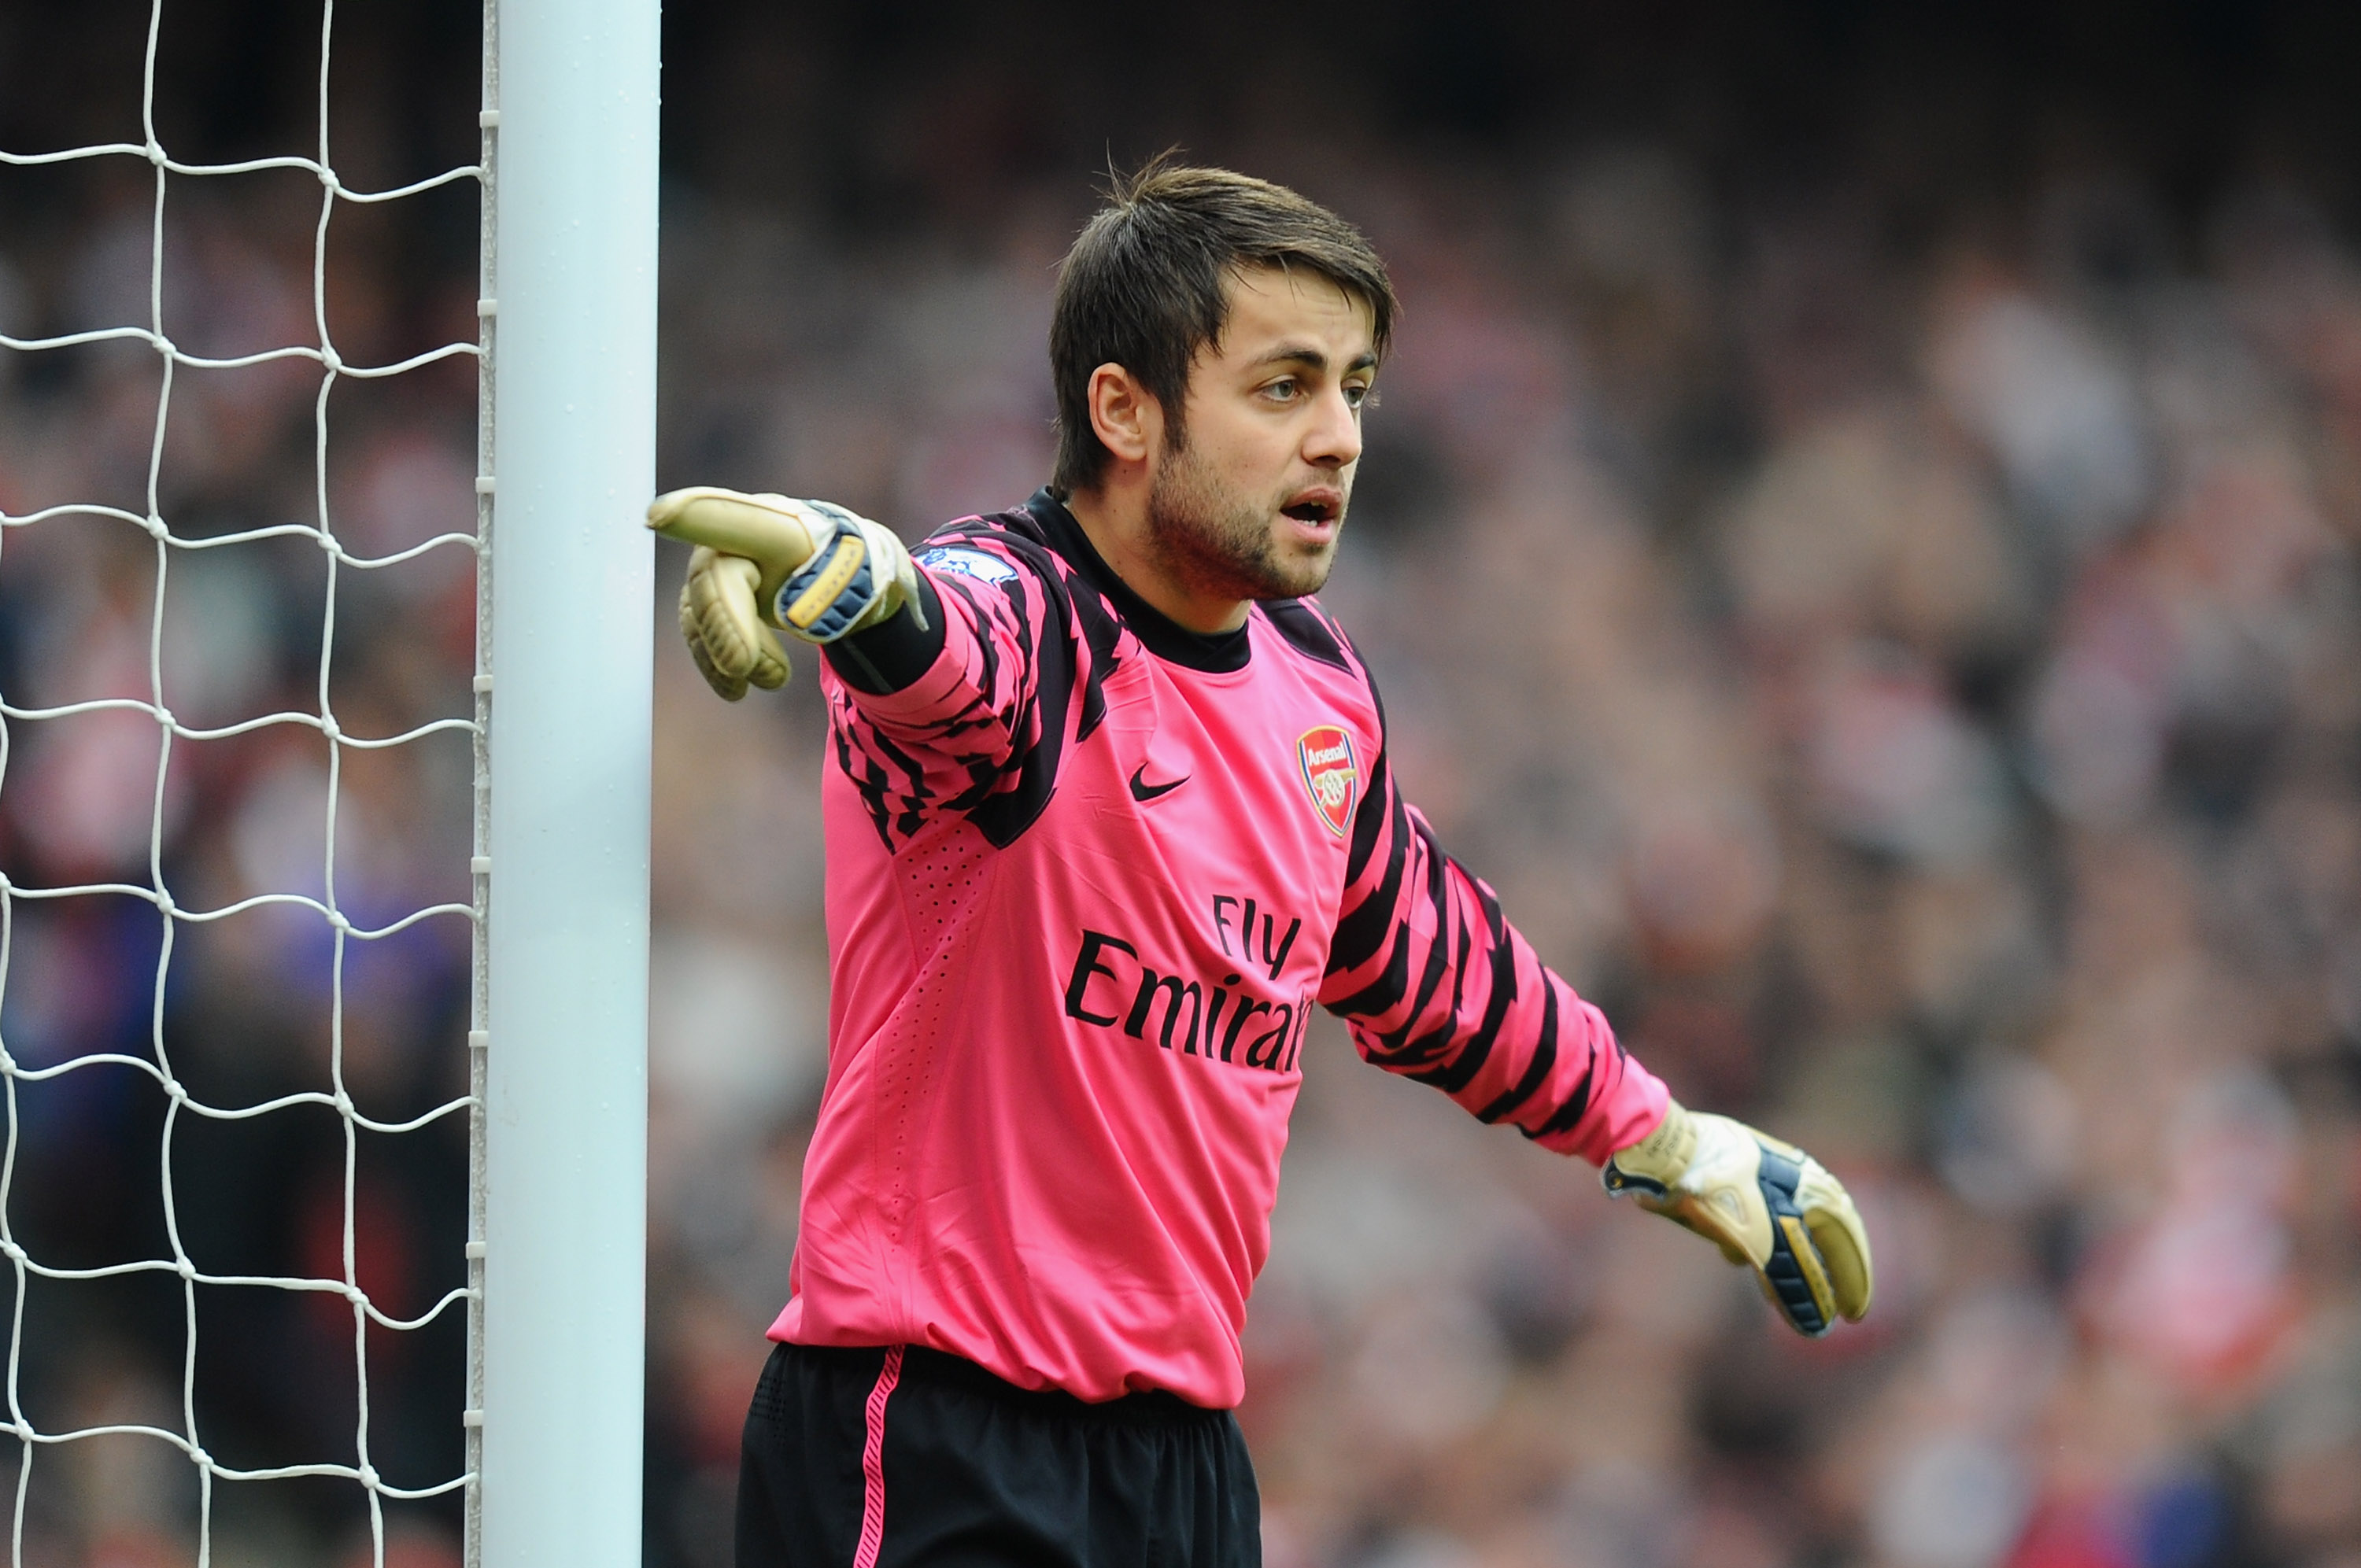 LONDON, ENGLAND - NOVEMBER 20:  Lukasz Fabianski of Arsenal in action during the Barclays Premier League match between Arsenal and Tottenham Hotspur at the Emirates Stadium on November 20, 2010 in London, England.  (Photo by Mike Hewitt/Getty Images)